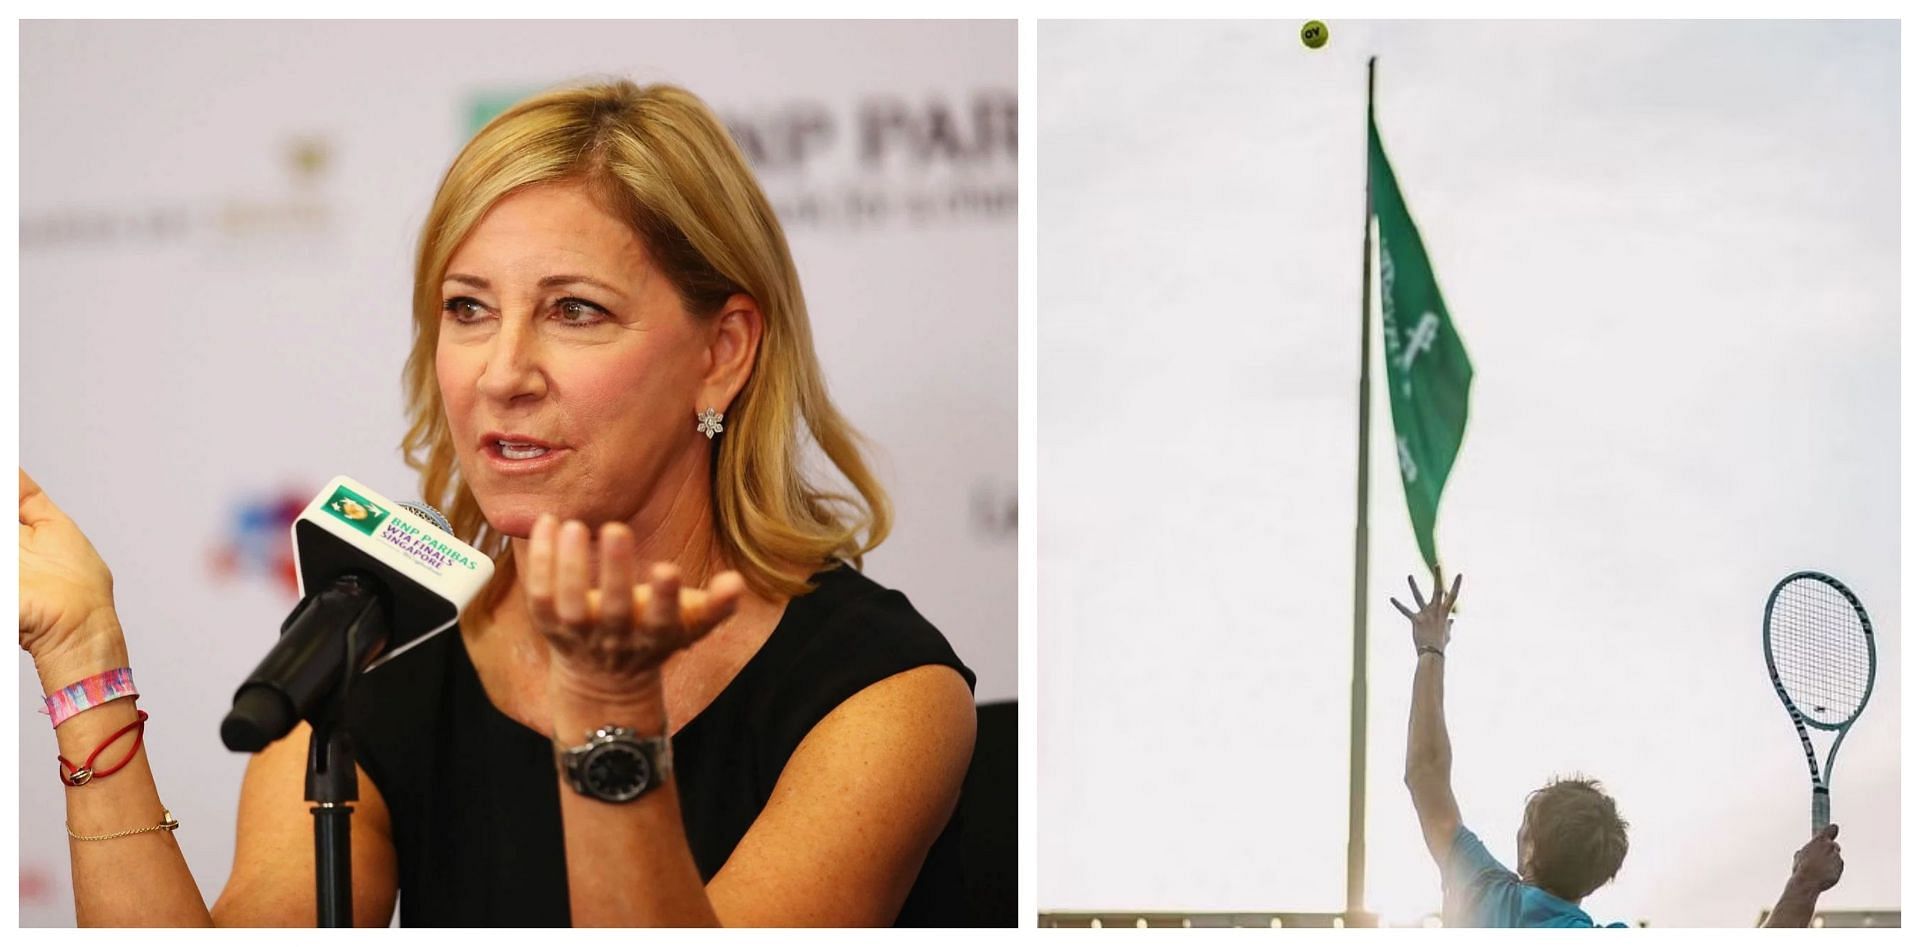 Chris Evert has backed the chorus to be judicious in awarding professional events to Saudi Arabia